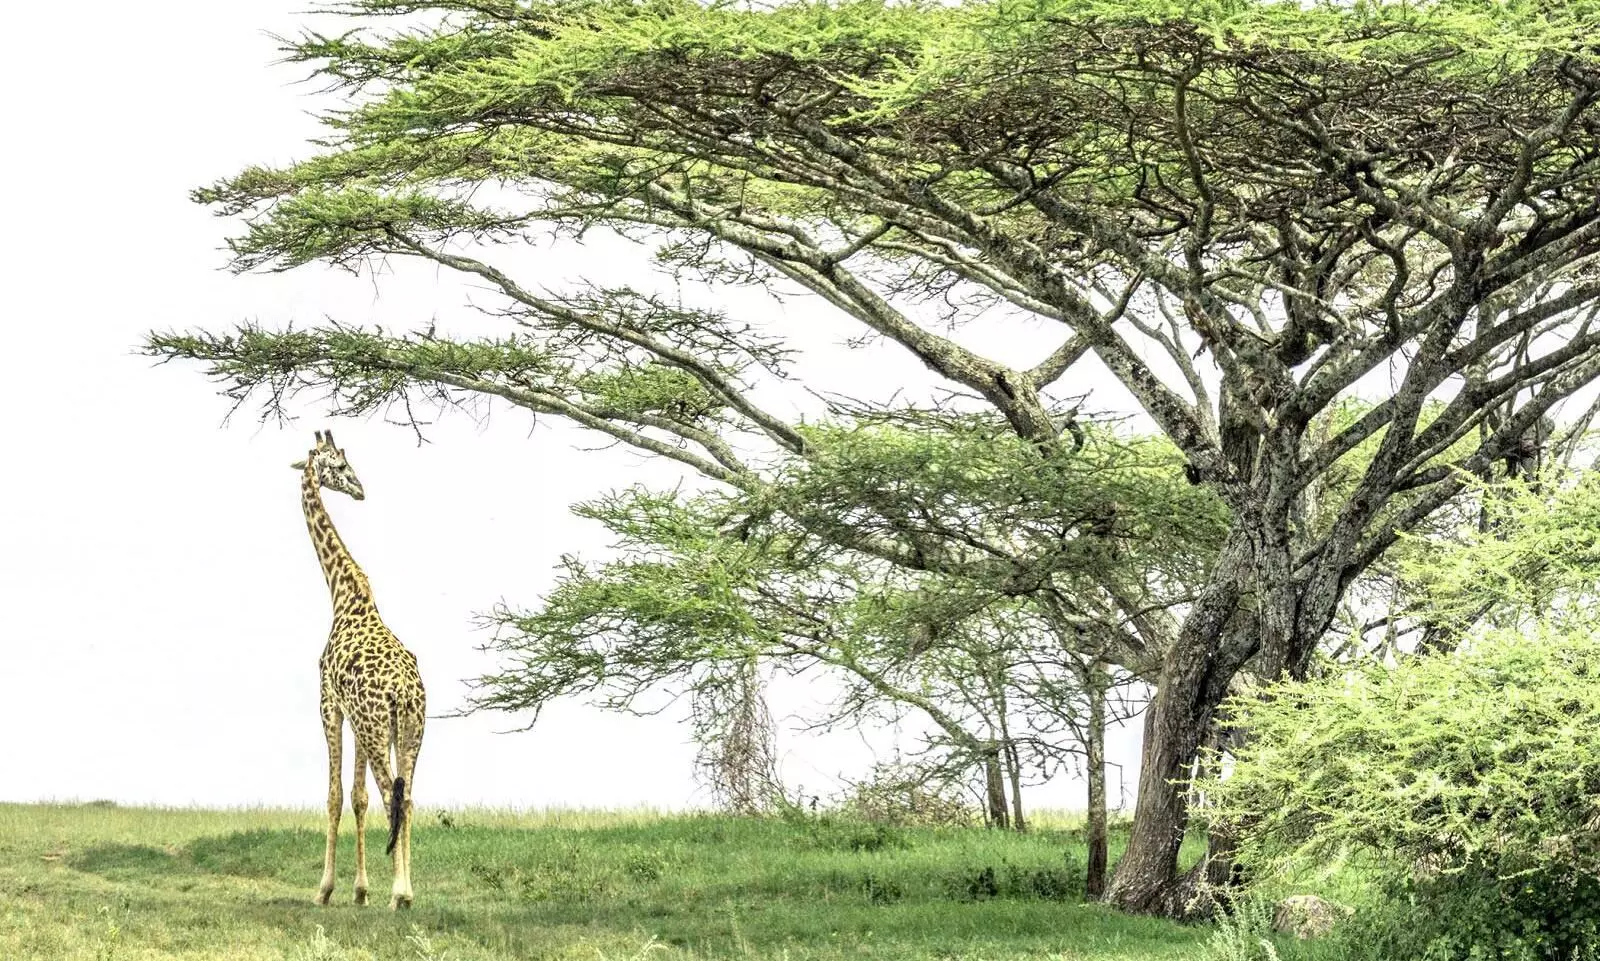 How acacia trees protect themselves from giraffes